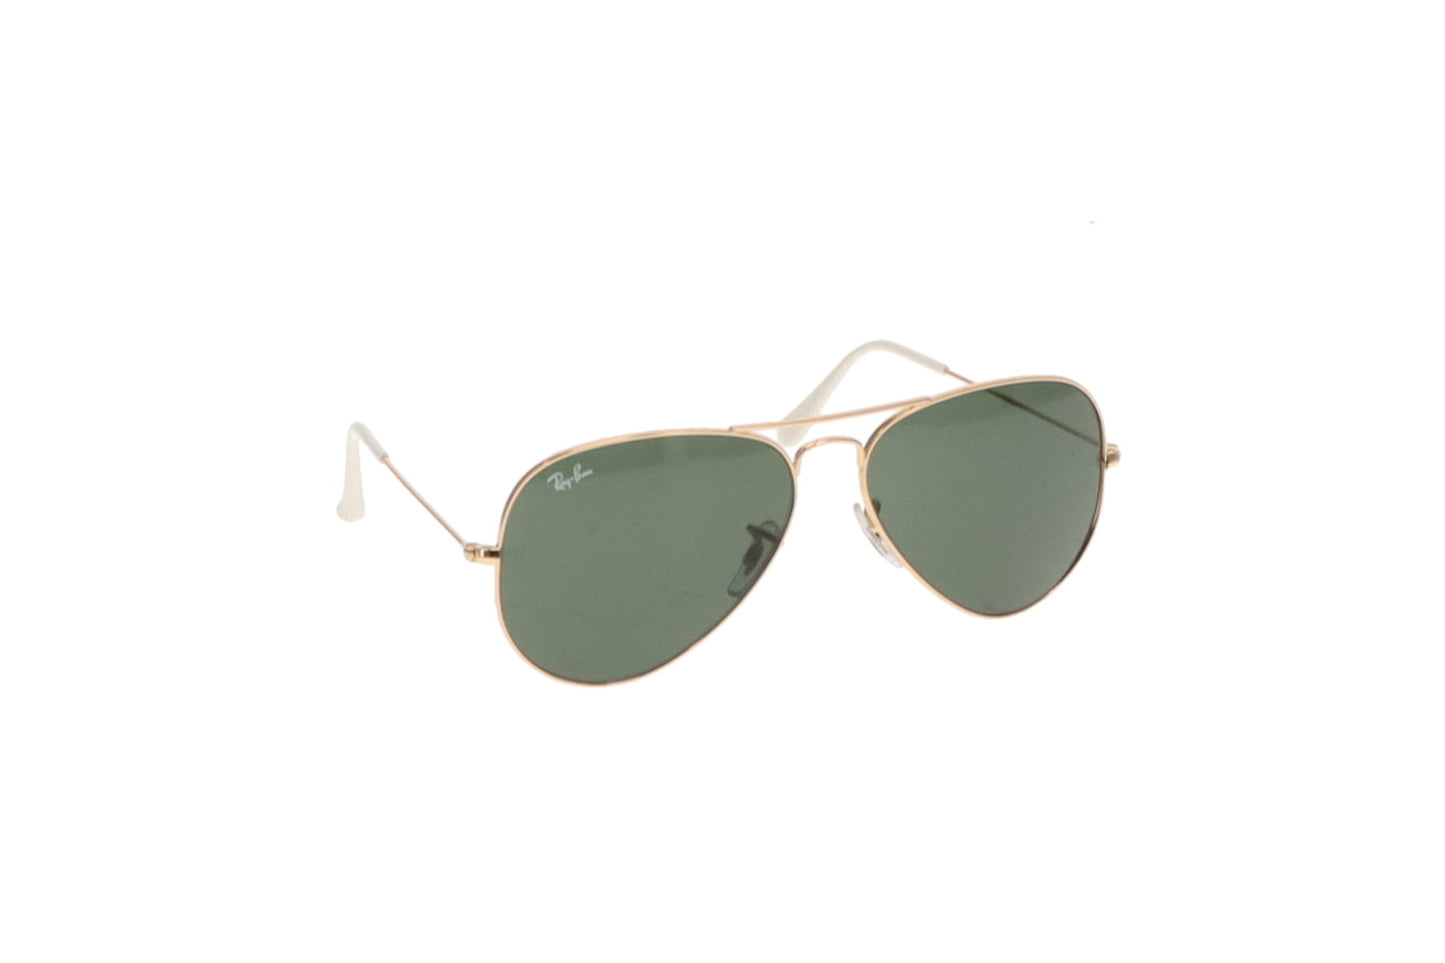 Ray-Ban Gold and White with Green Lens RB3025 Large Aviators